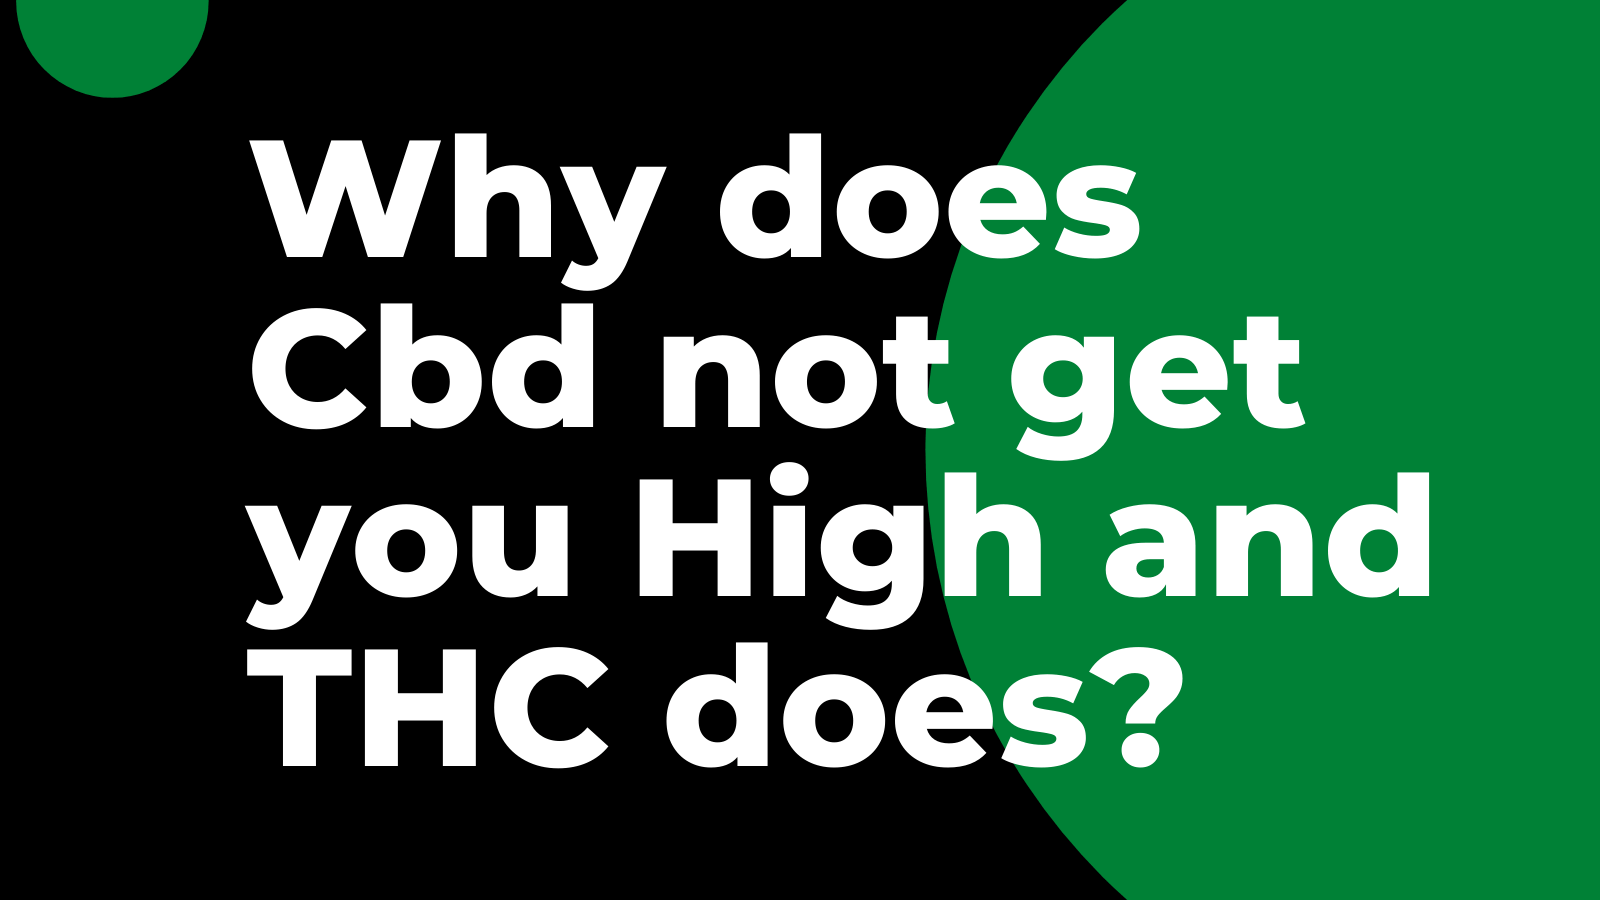 Why does CBD not get you High and THC does?